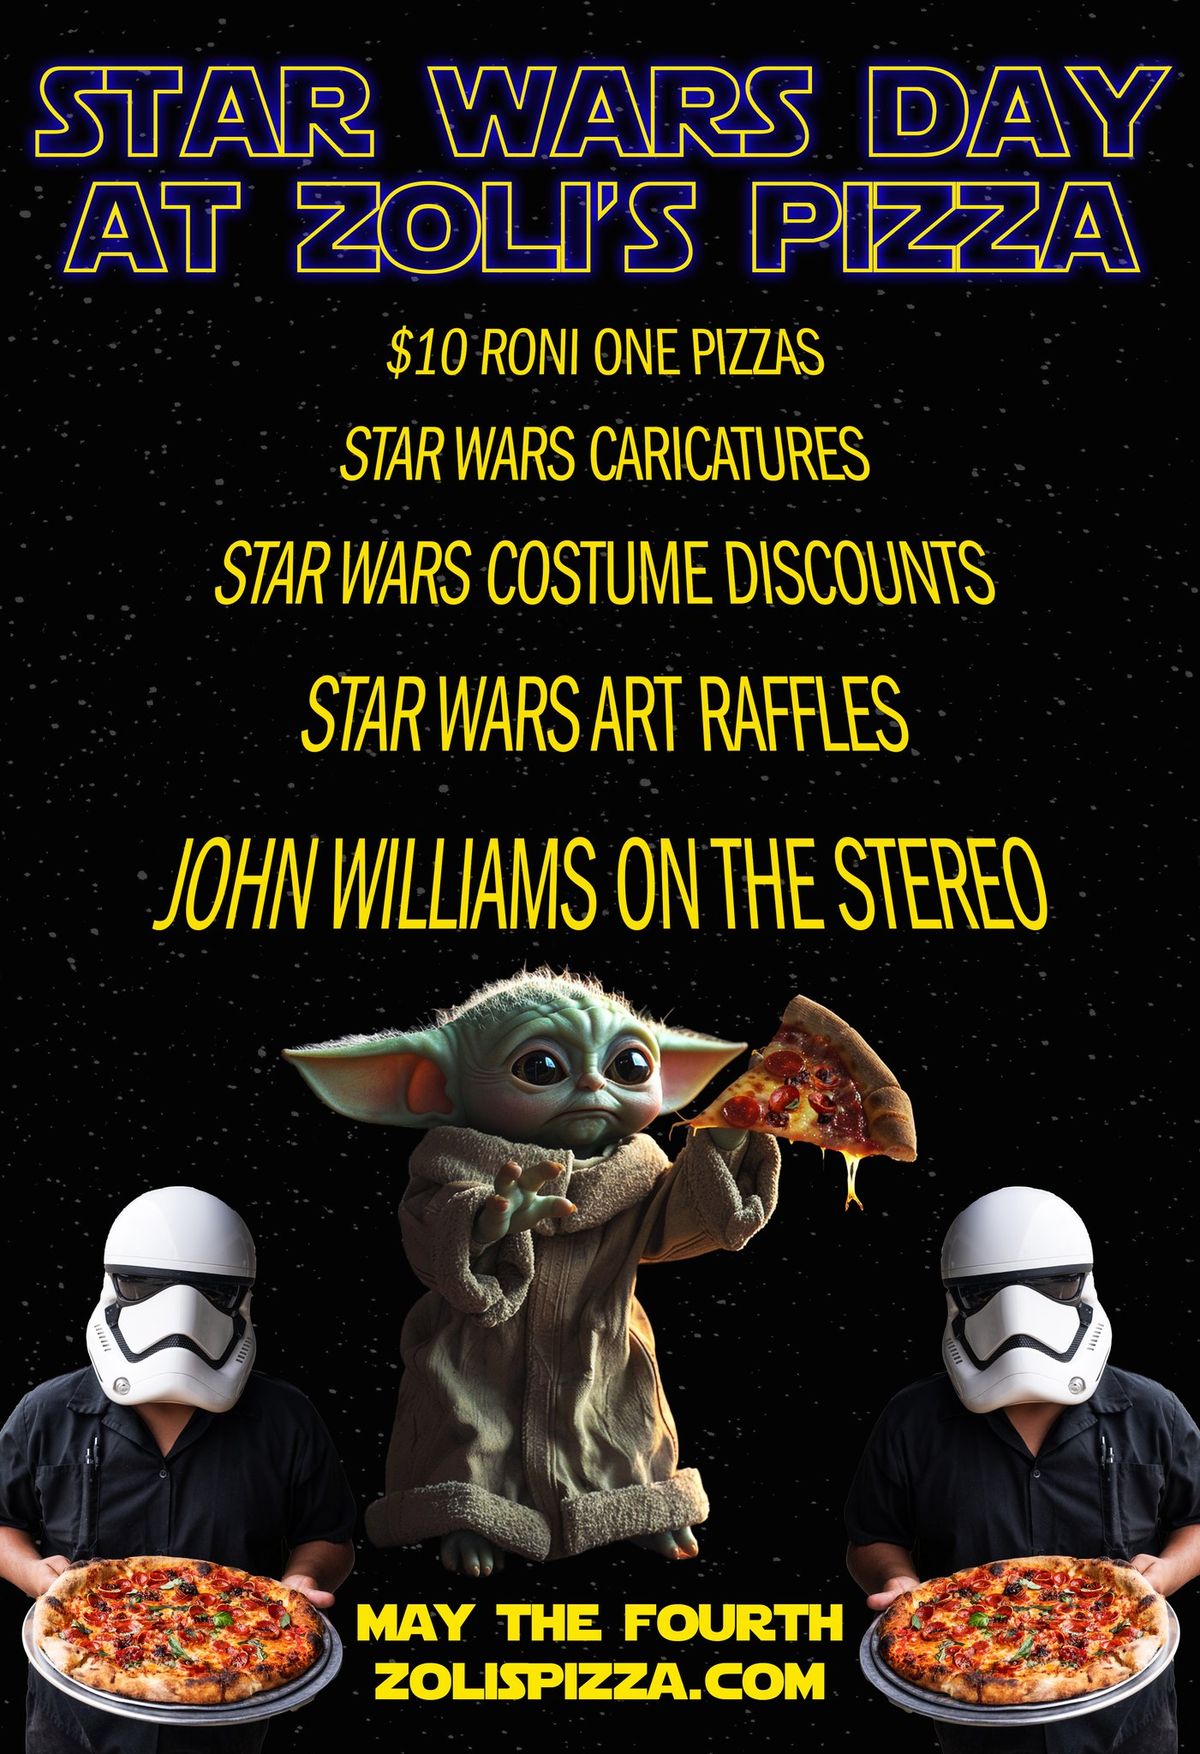 Star Wars Day $10 Roni Ones at Zoli's Pizza